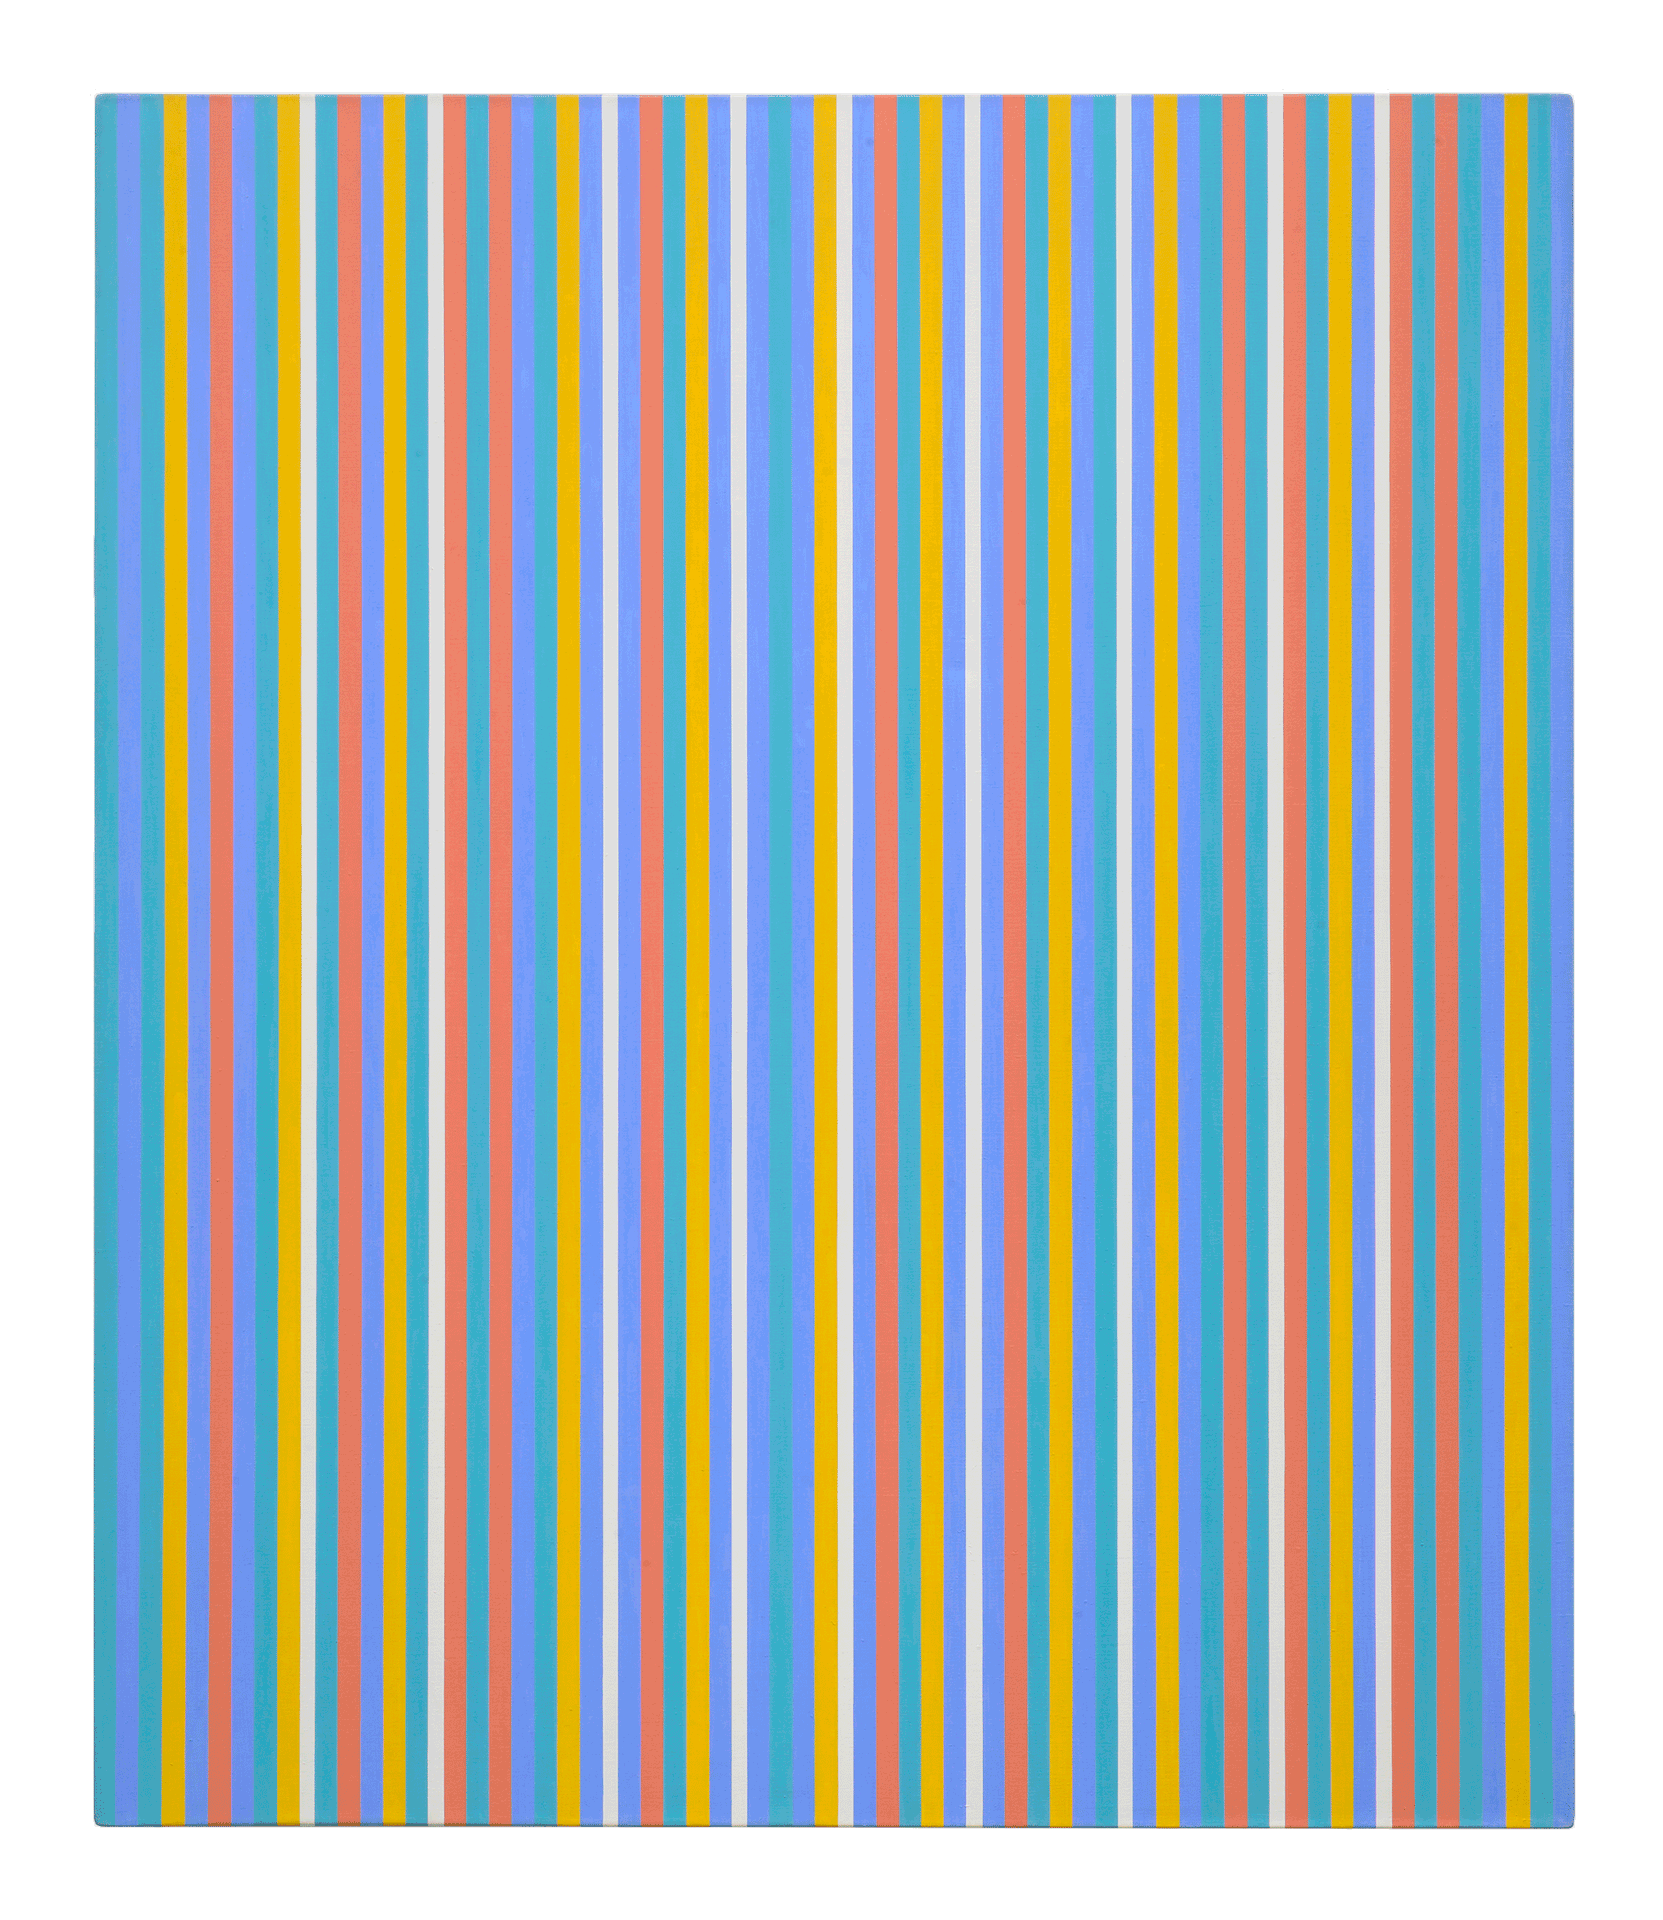 A painting by Bridget Riley, titled F√™te, dated 1982